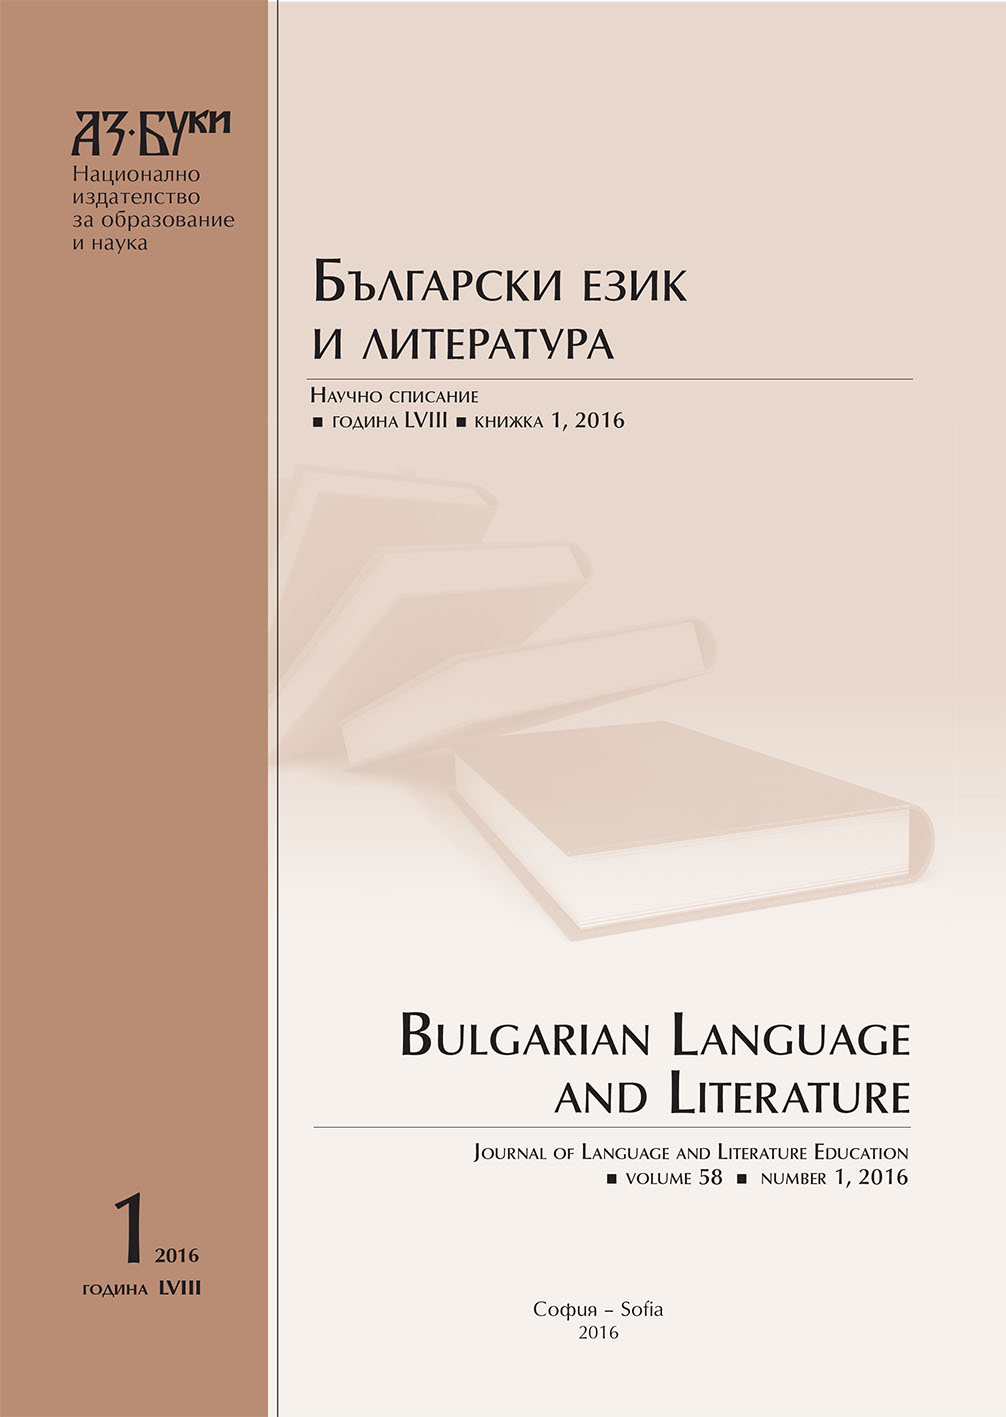 communicative exercises in the digital environment (I – IV Grade) Cover Image